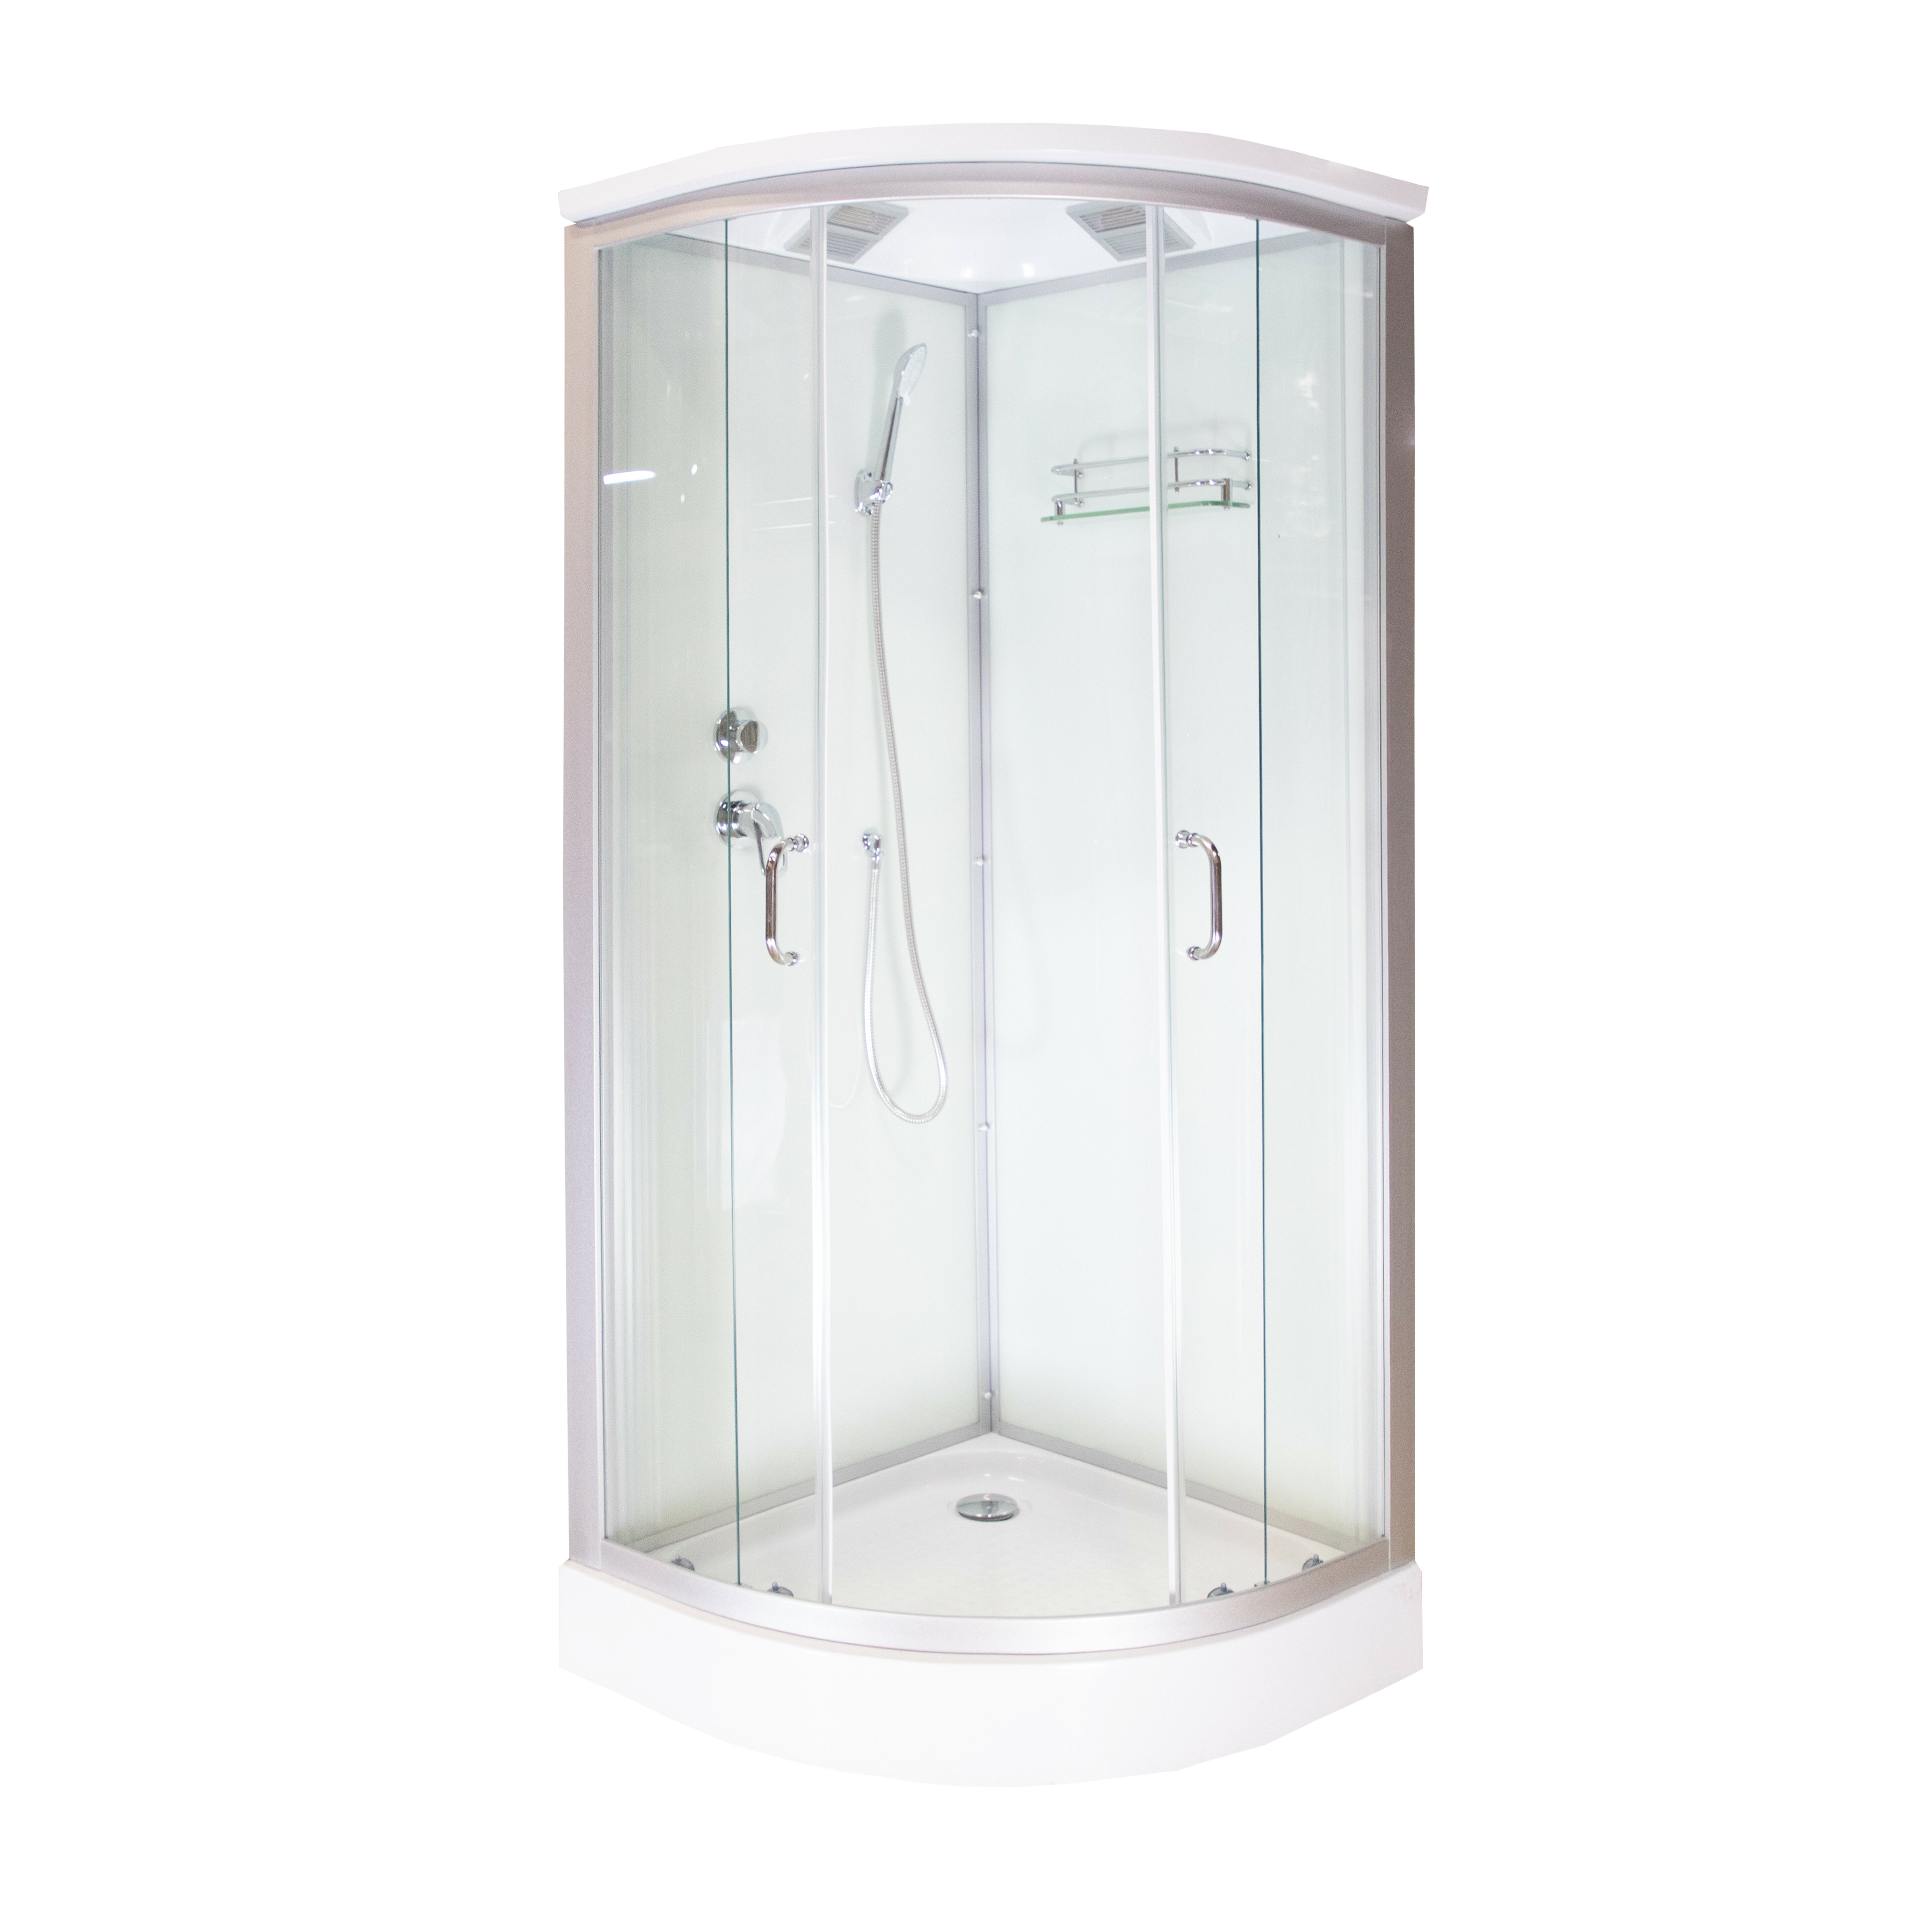 Royal Home Showers 32 W X 86 H Framed Round Sliding Shower Enclosure With Base Included Reviews Wayfair